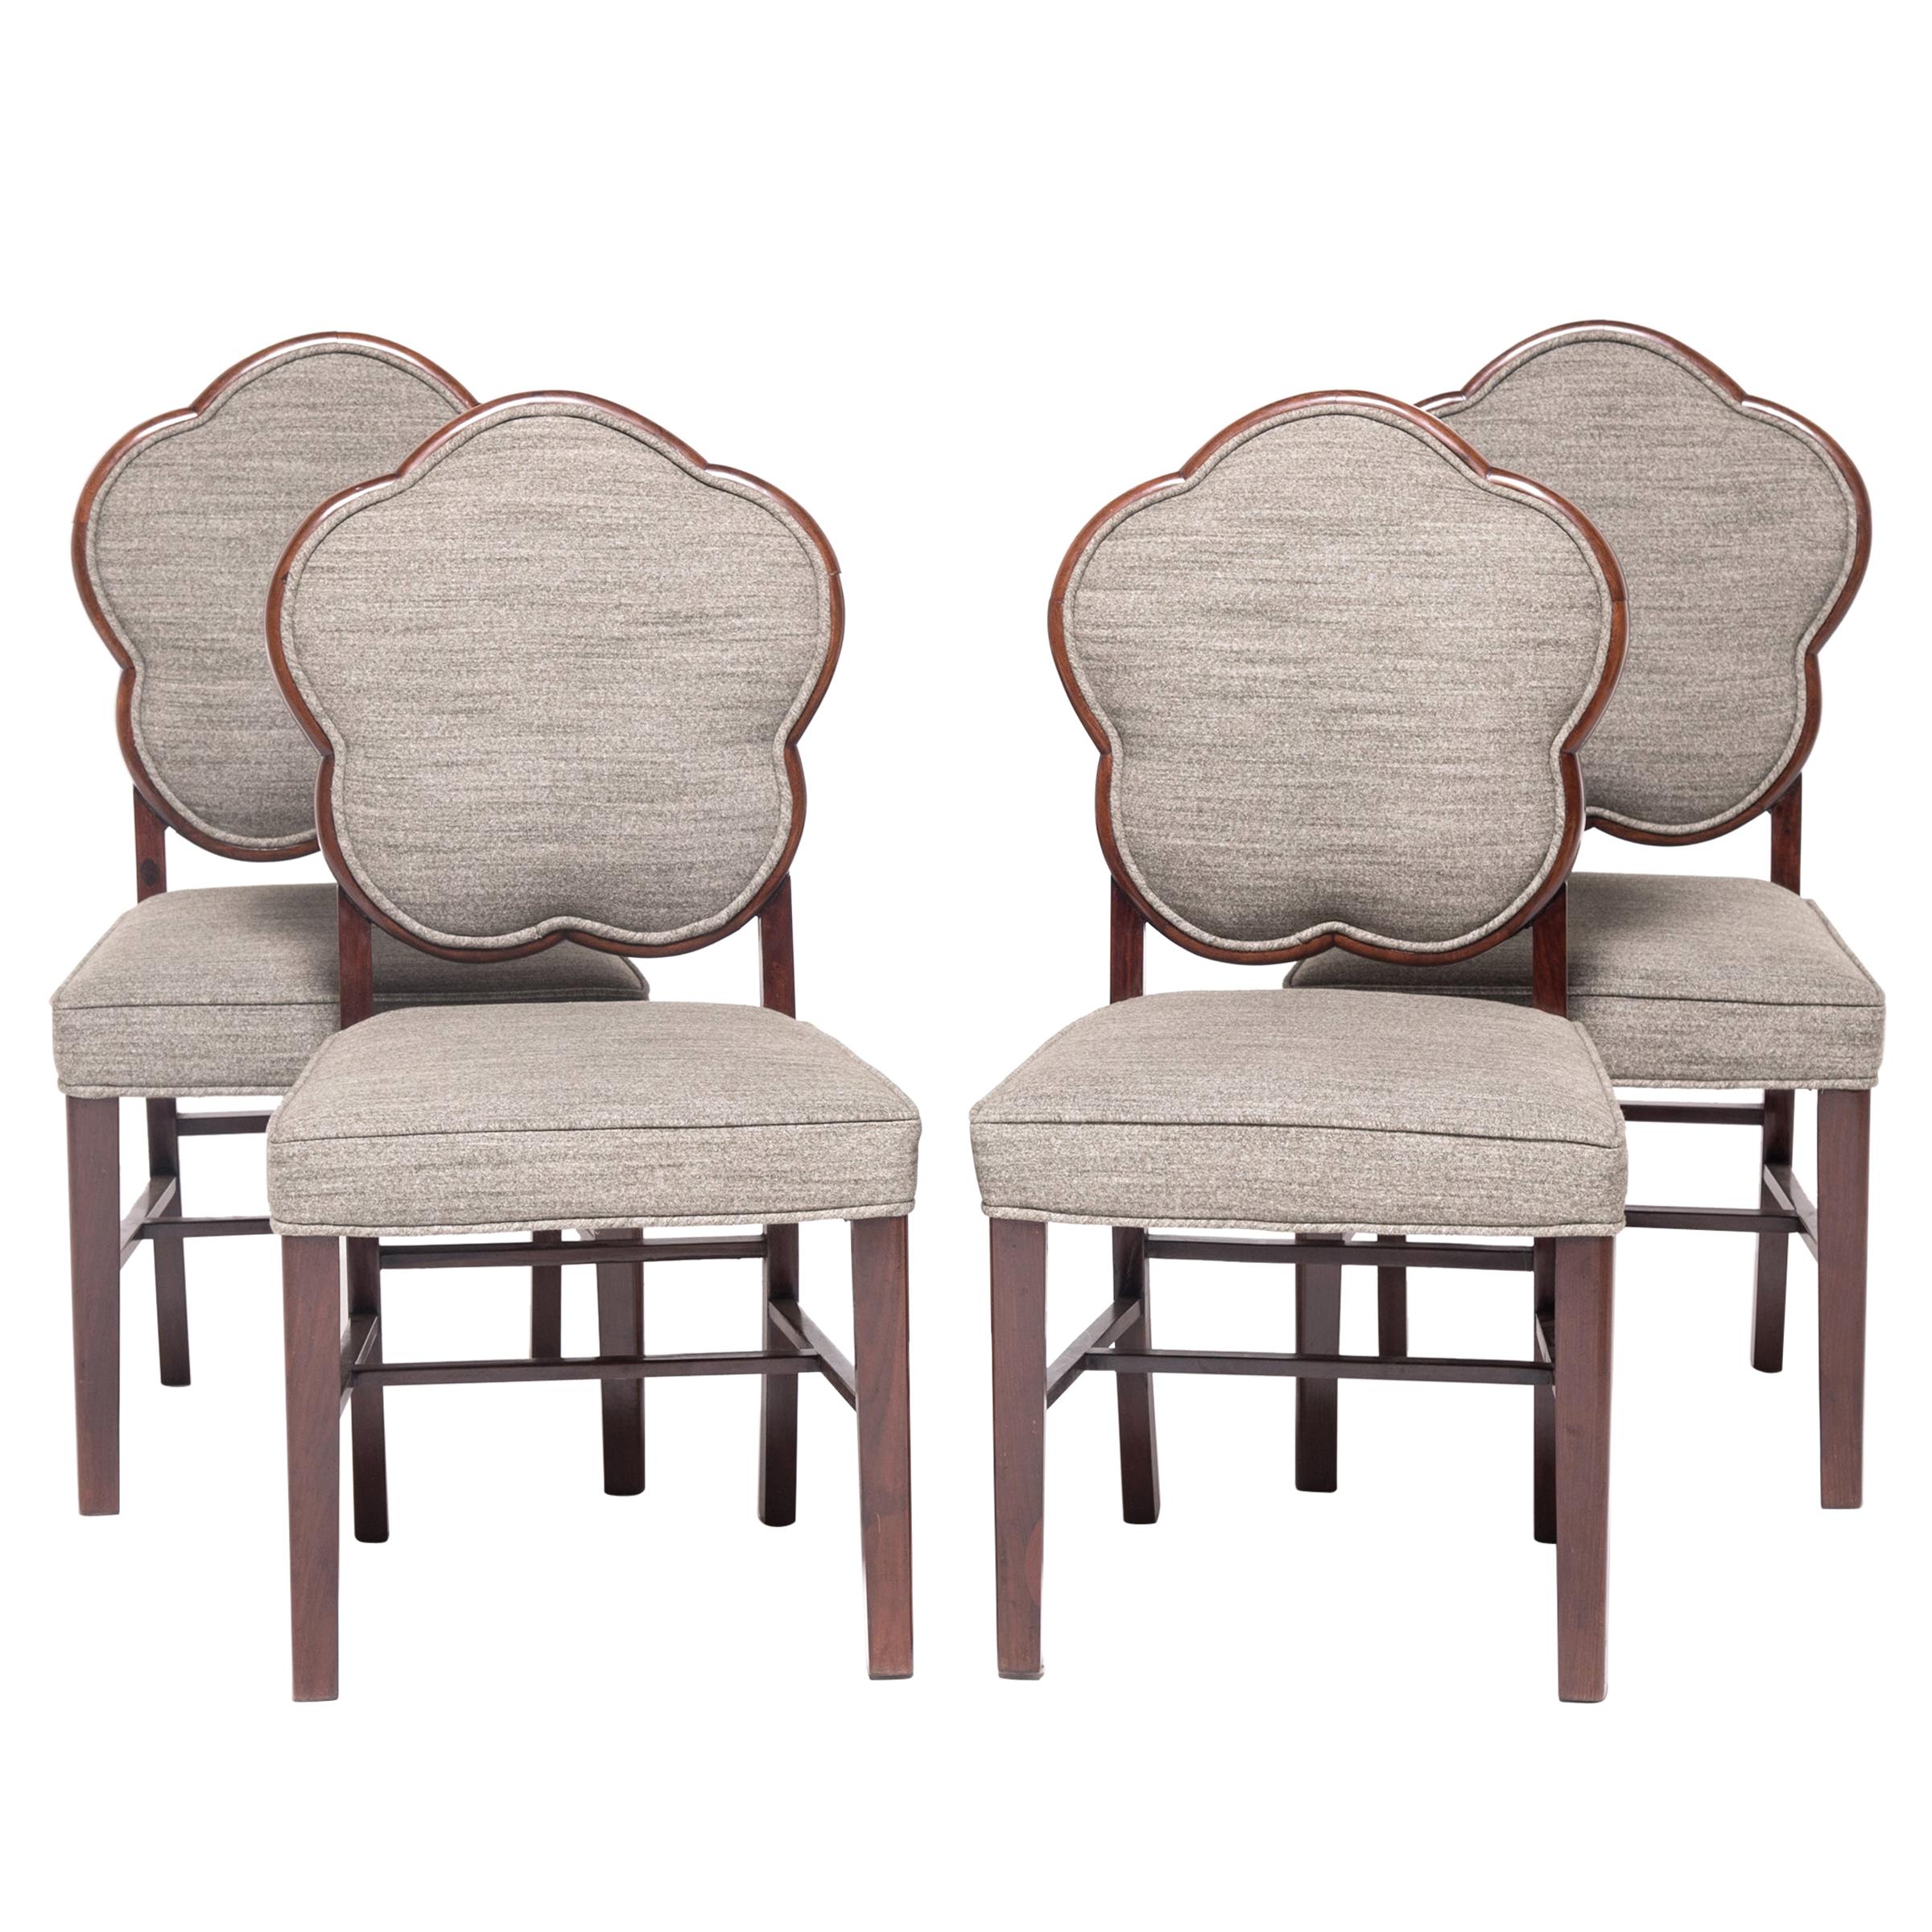 Set of Four Chinese Deco Dining Chairs, circa 1920s